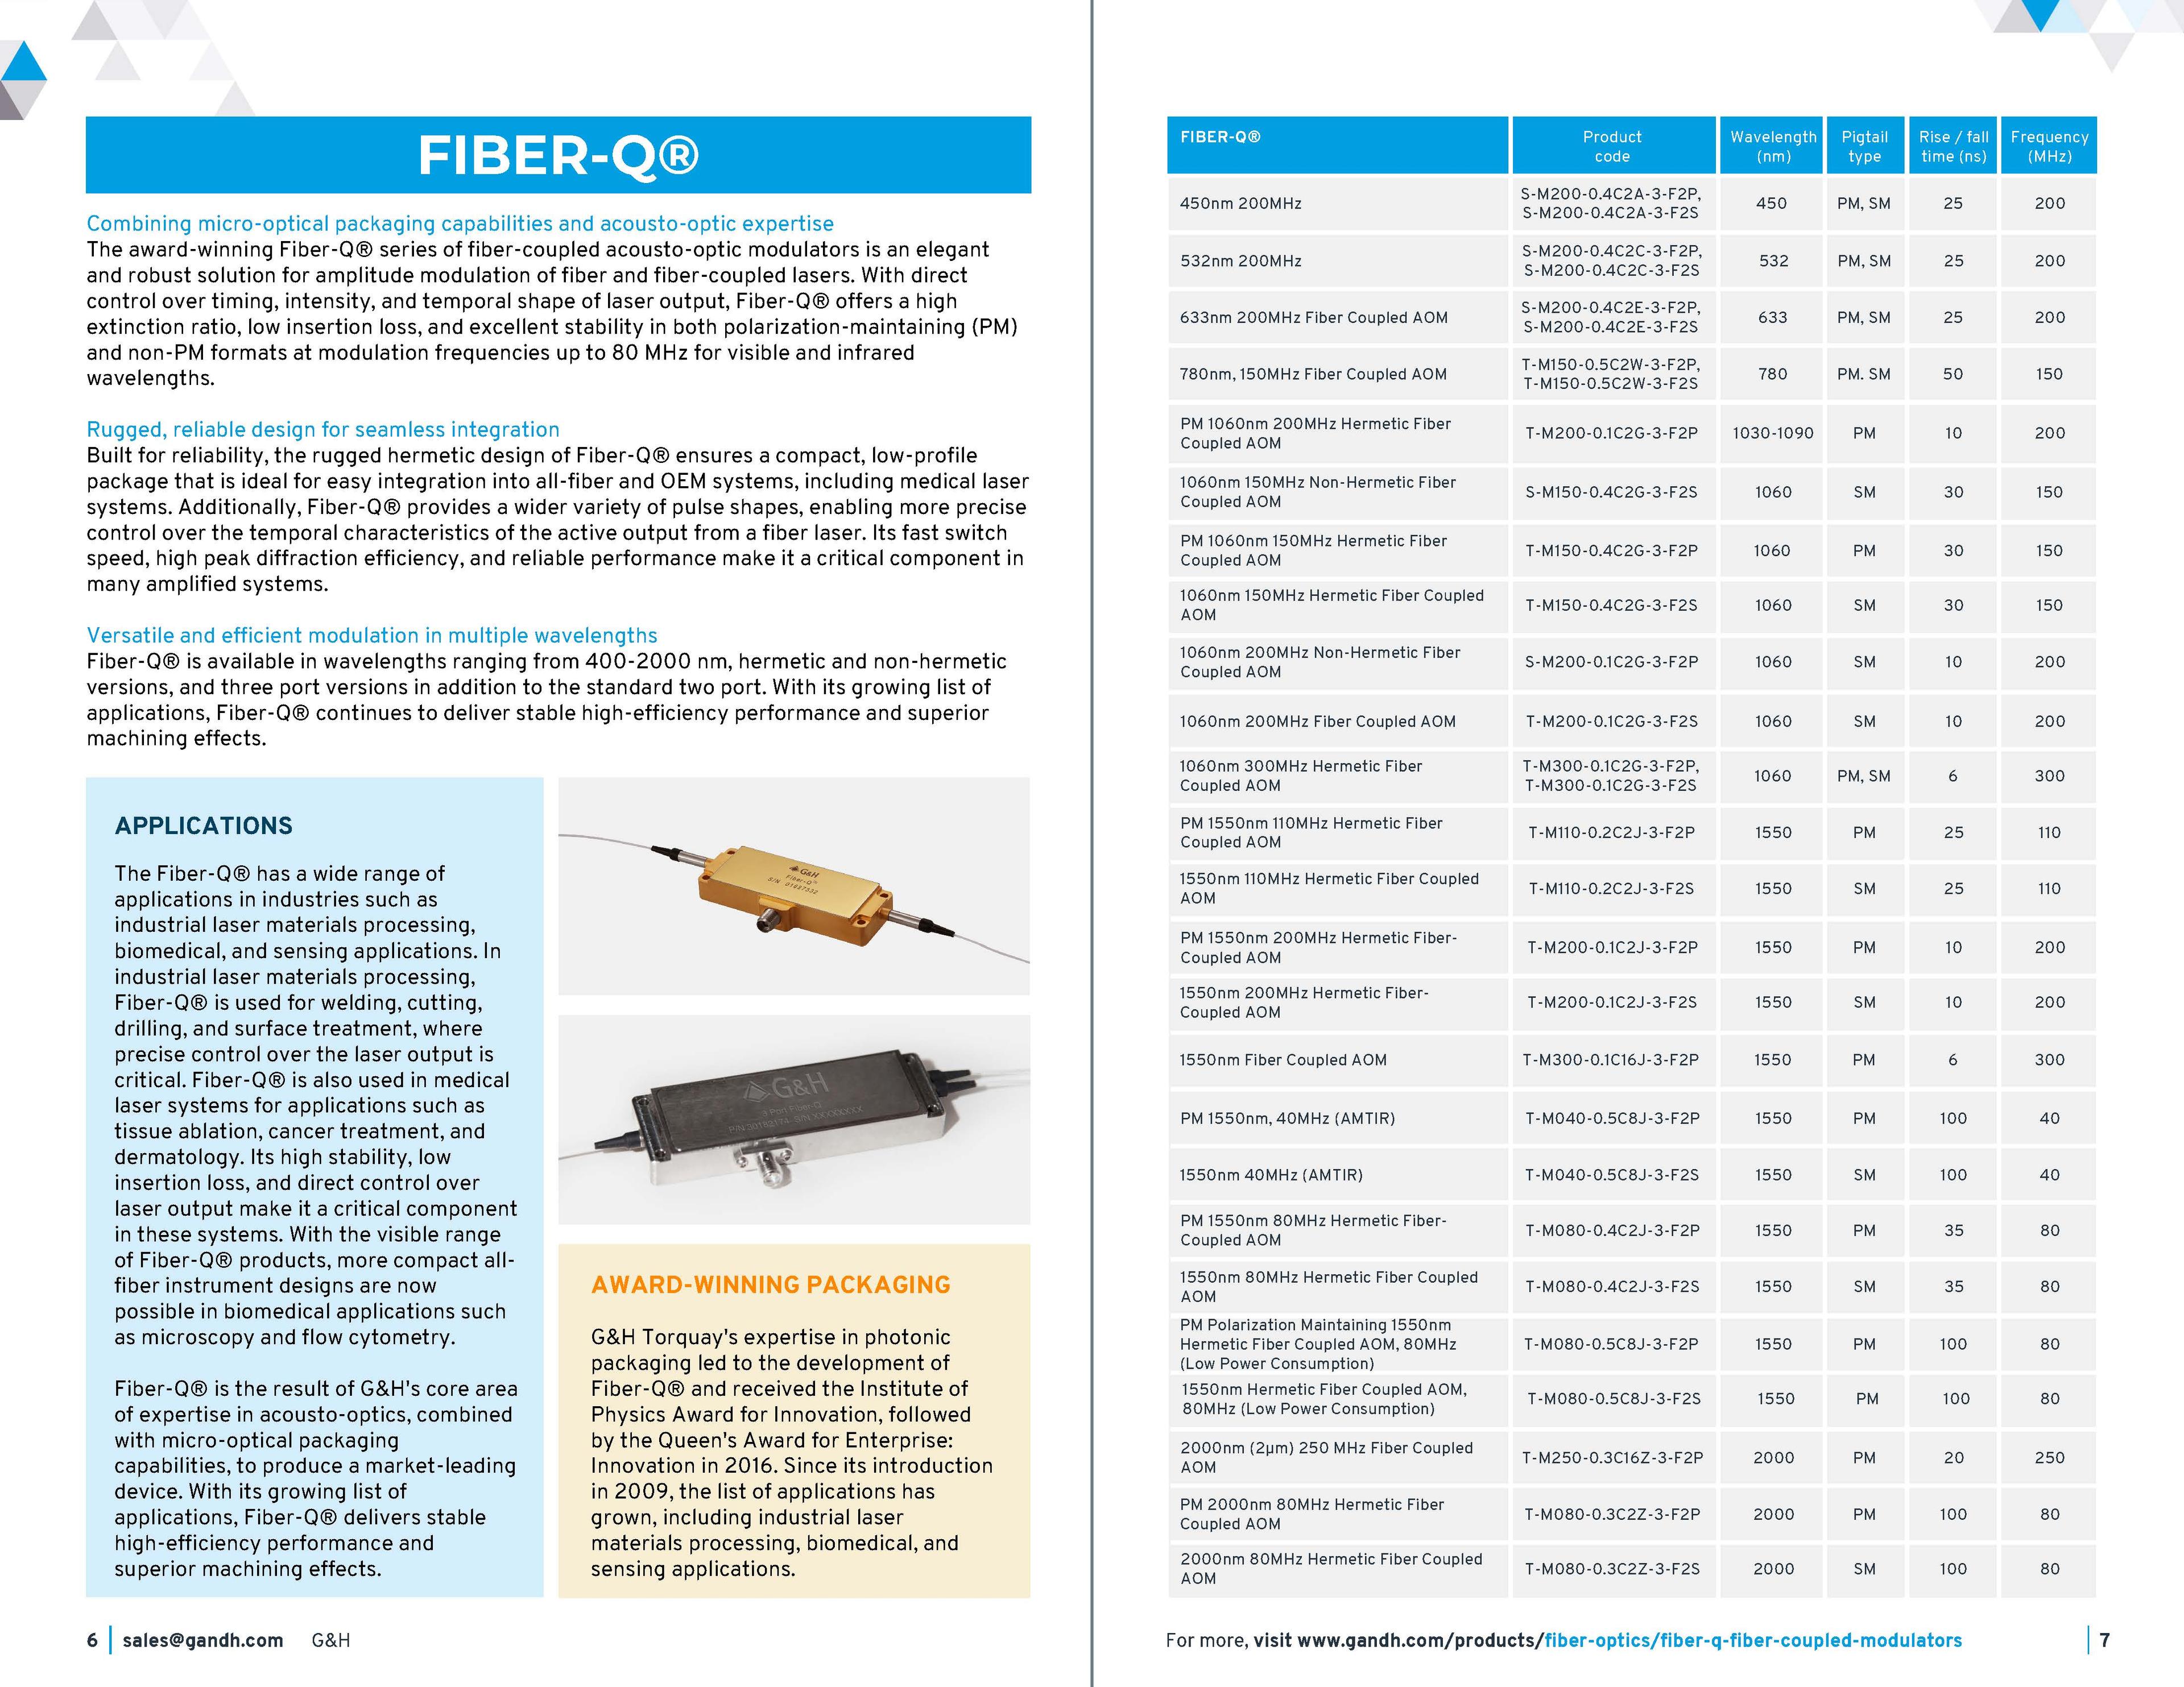 G&H Product & Solutions Guide - Fiber Optics Page 06-07